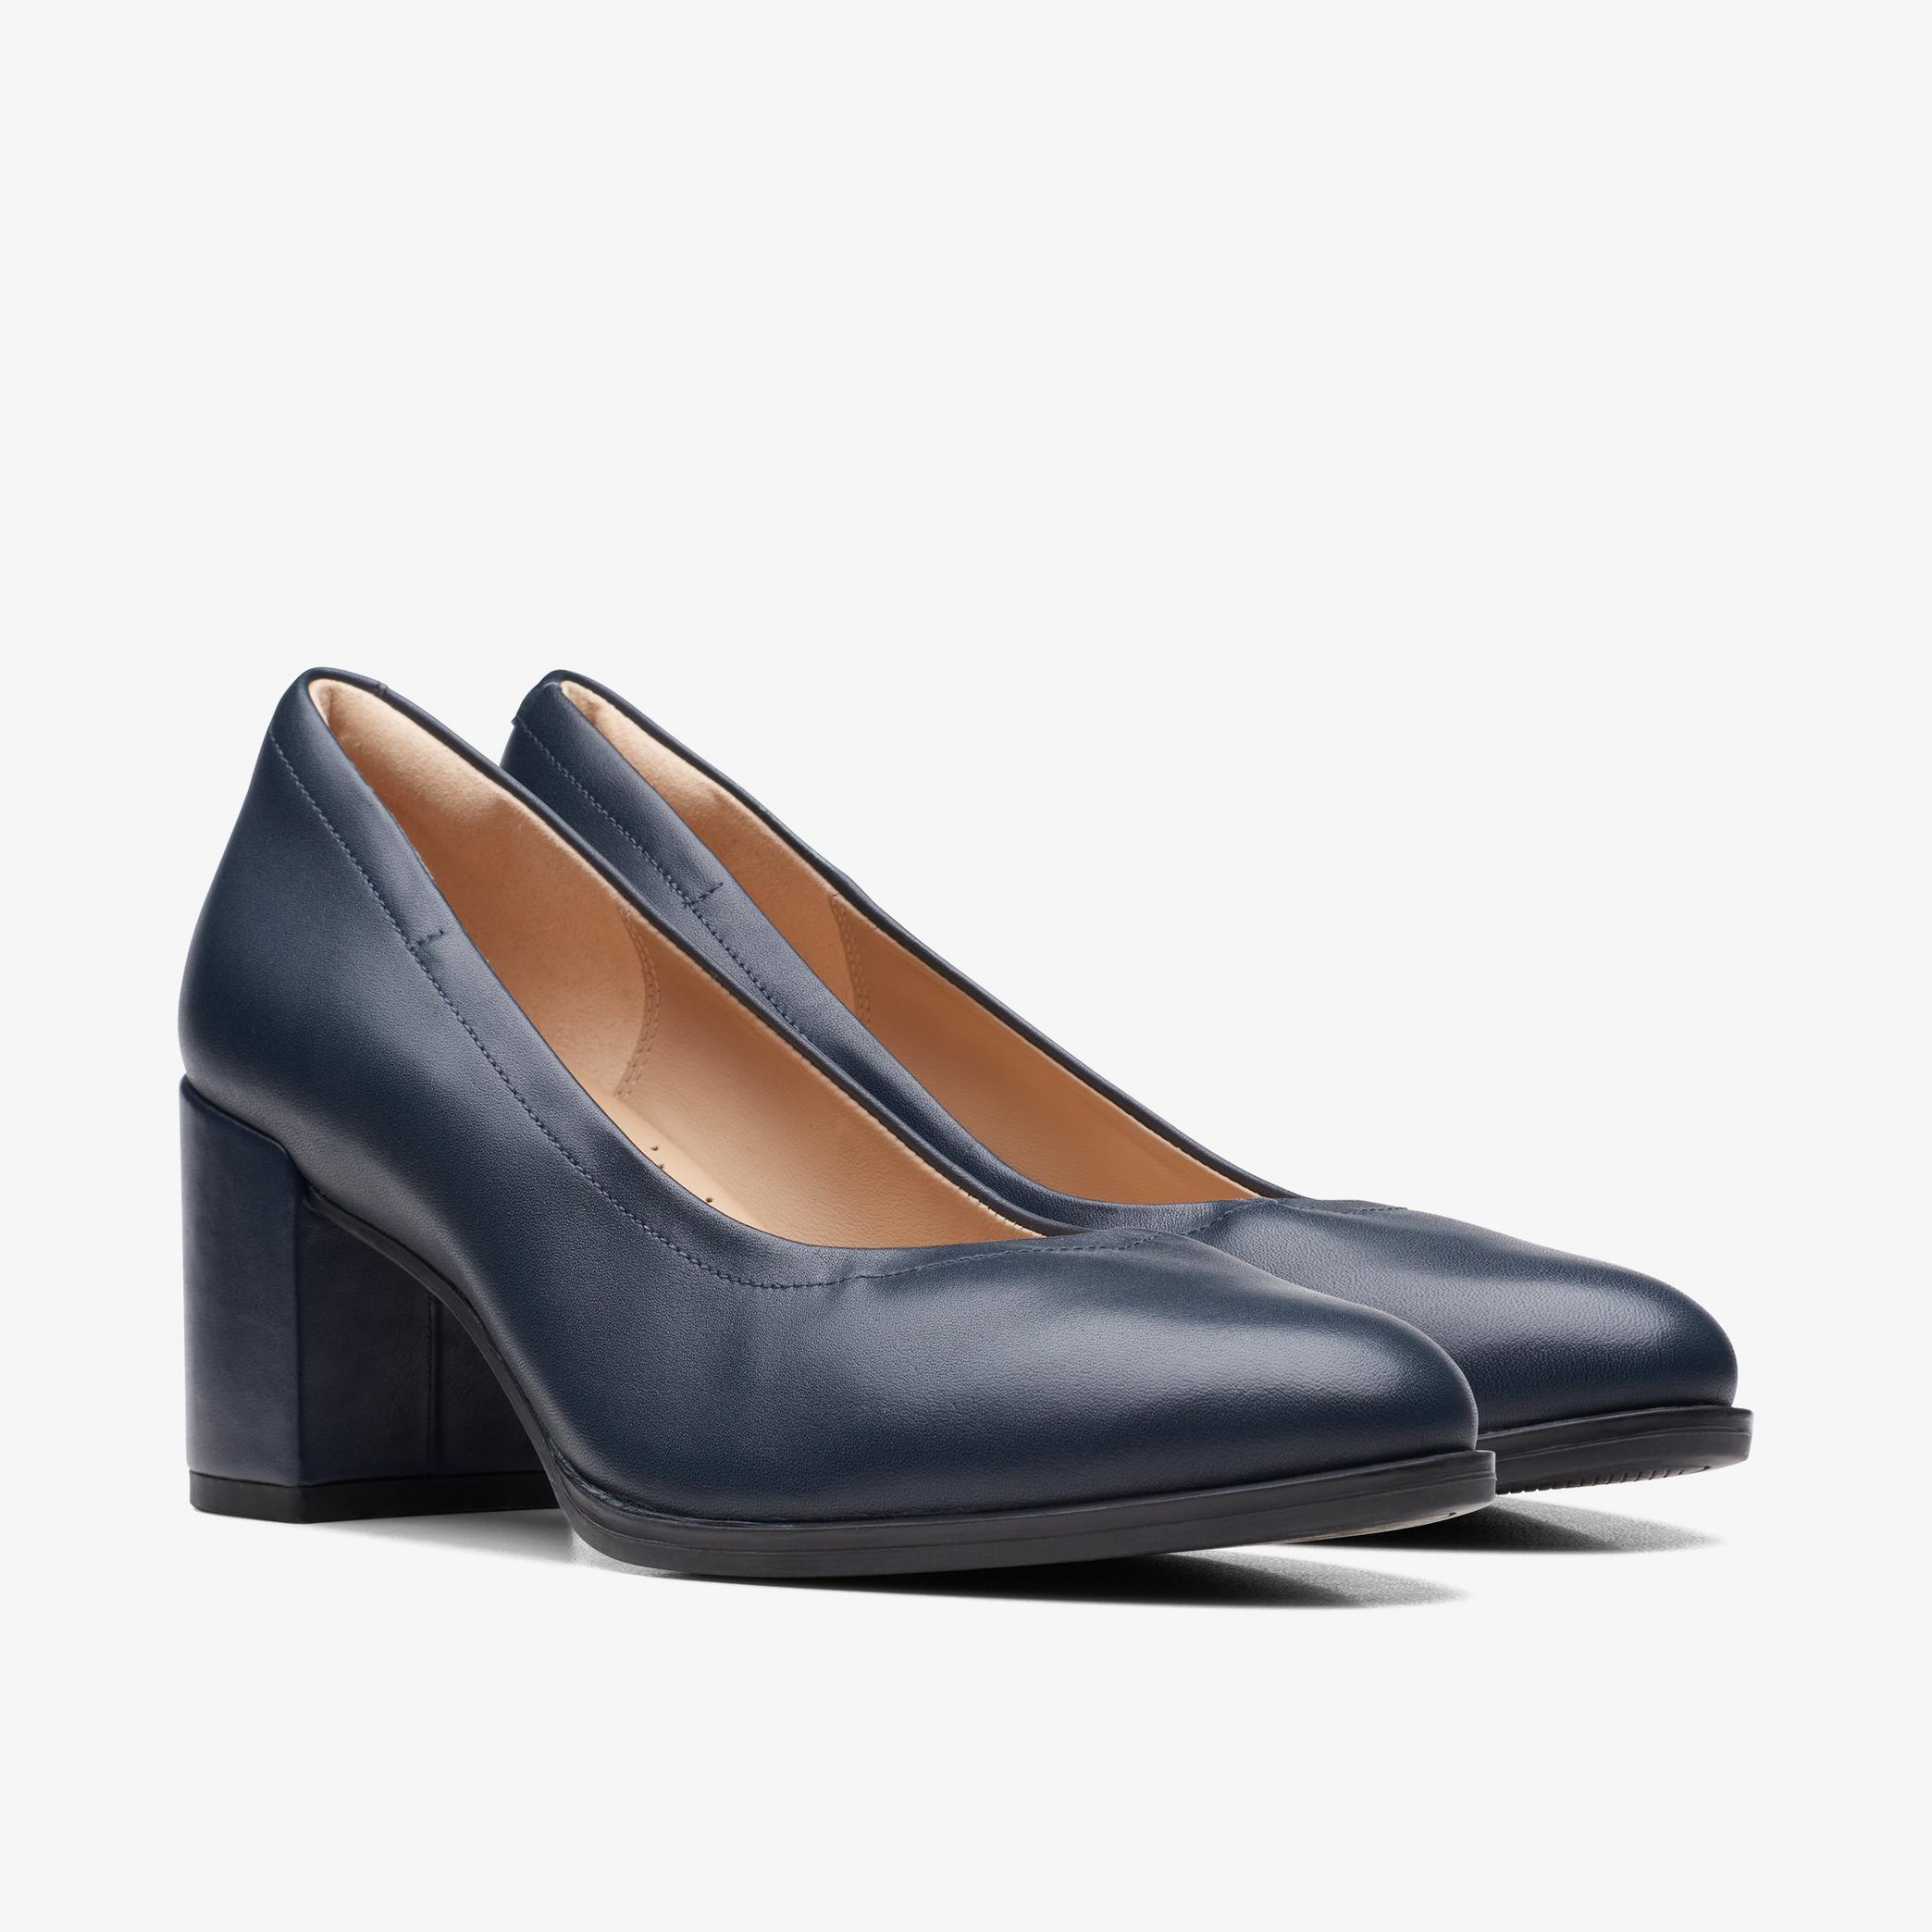 Freva 55 Court Navy Leather High Heels, view 5 of 8